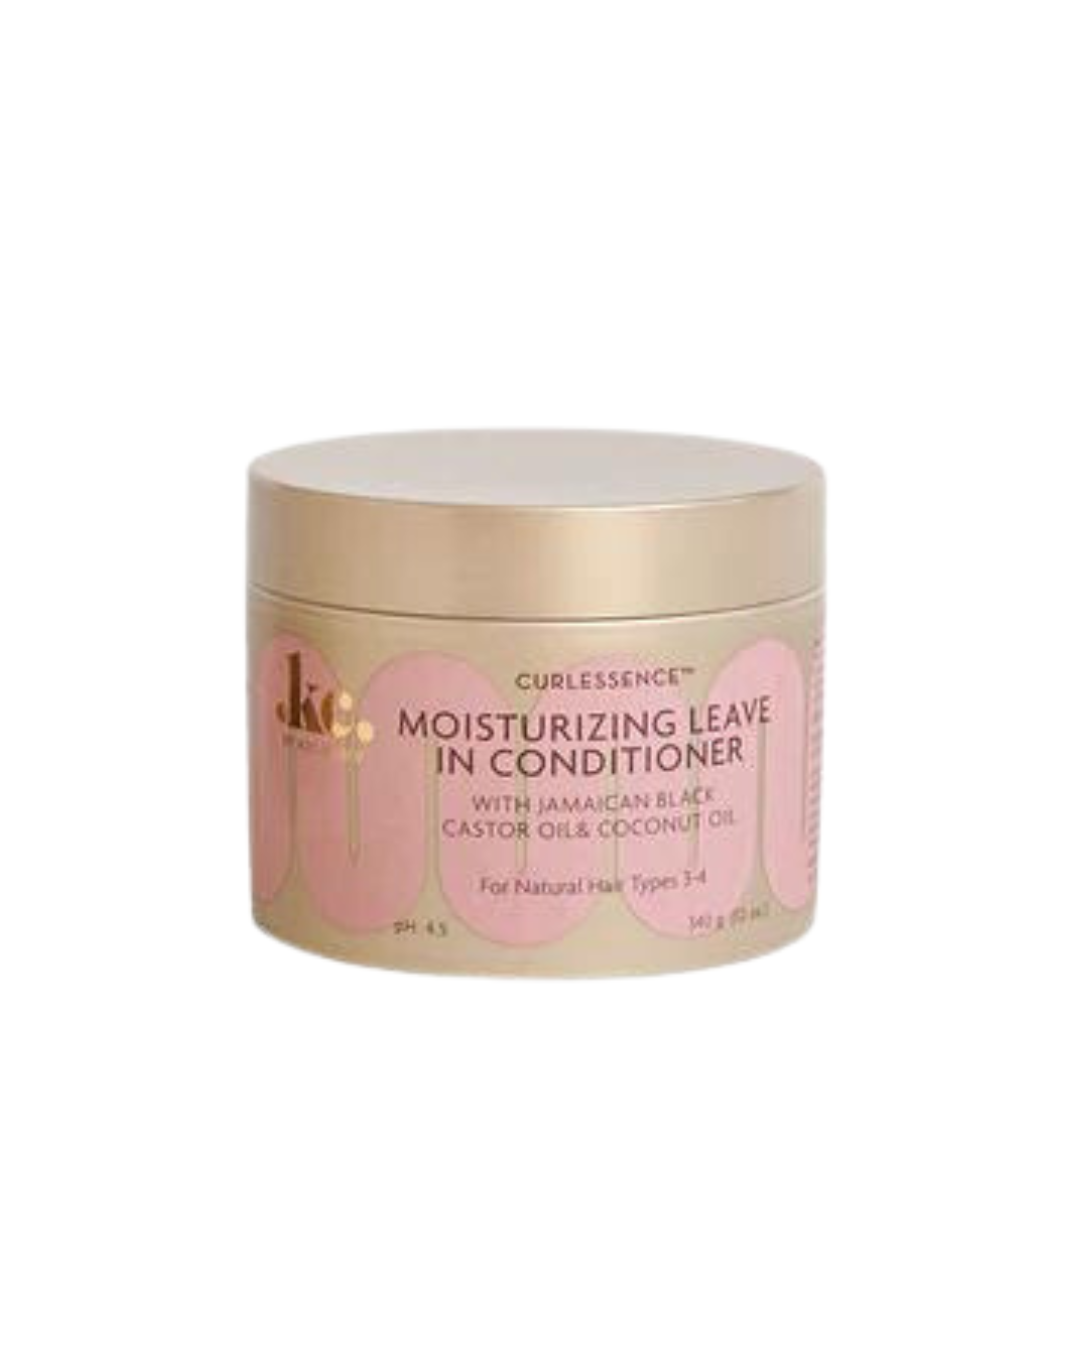 Curlessence Moisturizing Leave-In Conditioner 320g